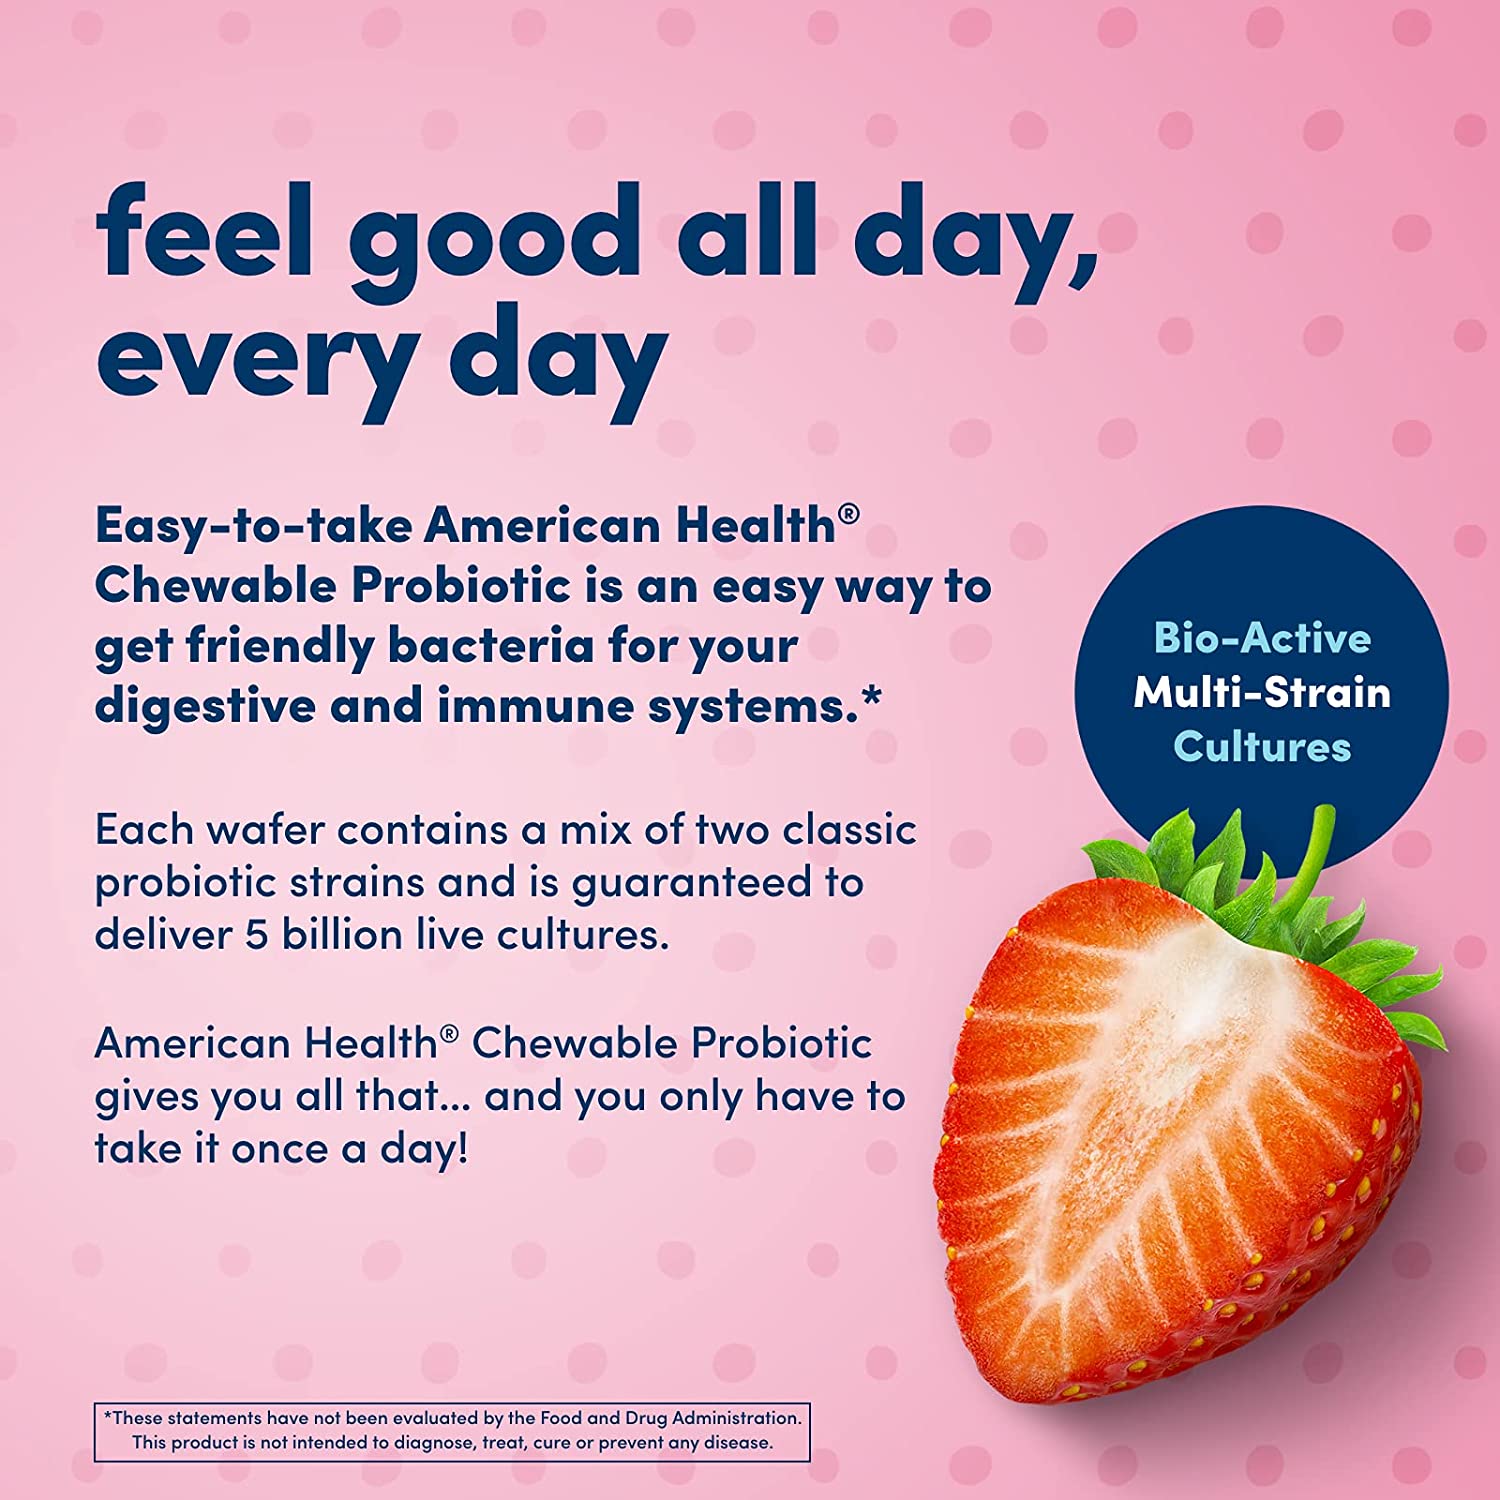 American Health, Once Daily Chewable Probiotic, Natural Strawberry, 5 Billion CFU, 30 Chewable Tablets